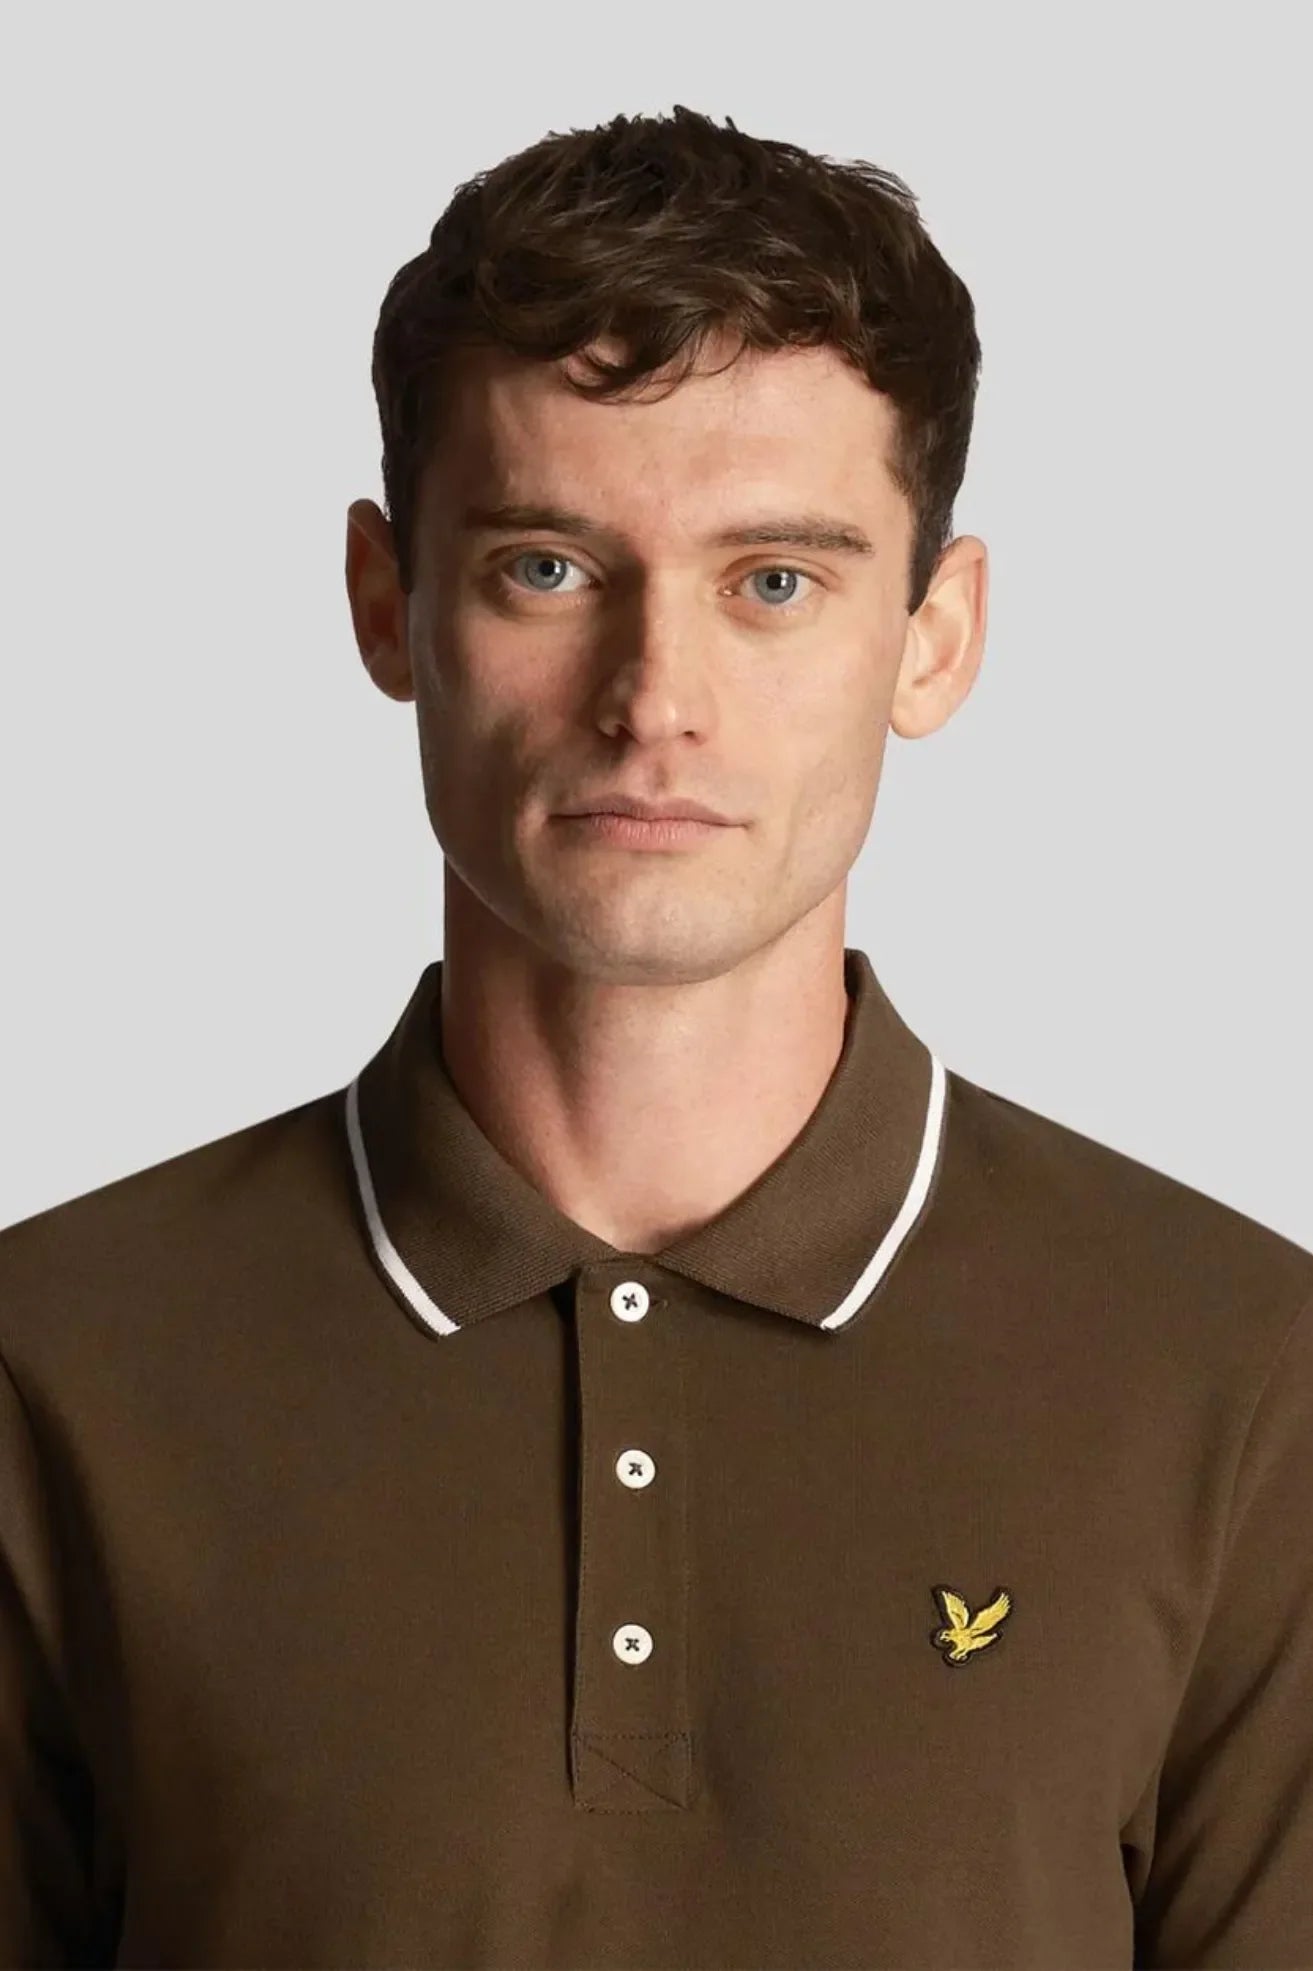 Lyle And Scott Tipped Polo Hombre Olive